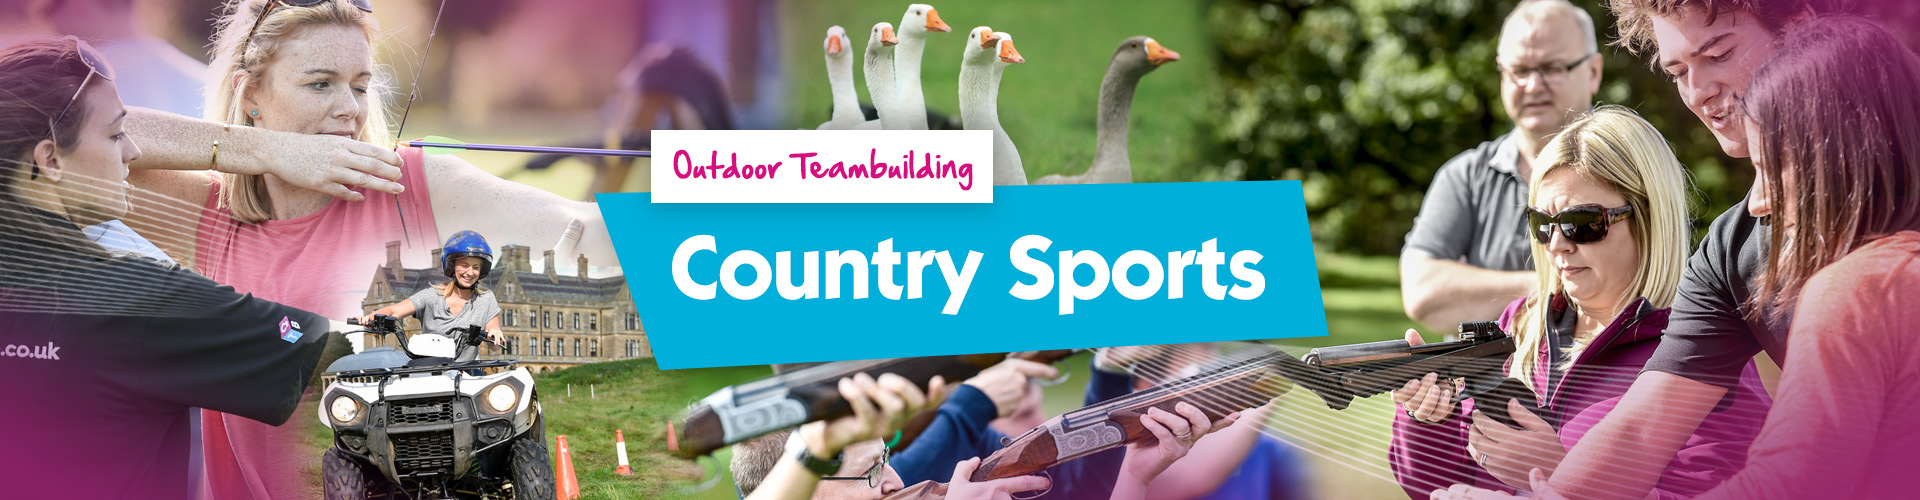 Teambuilding | Country Sports